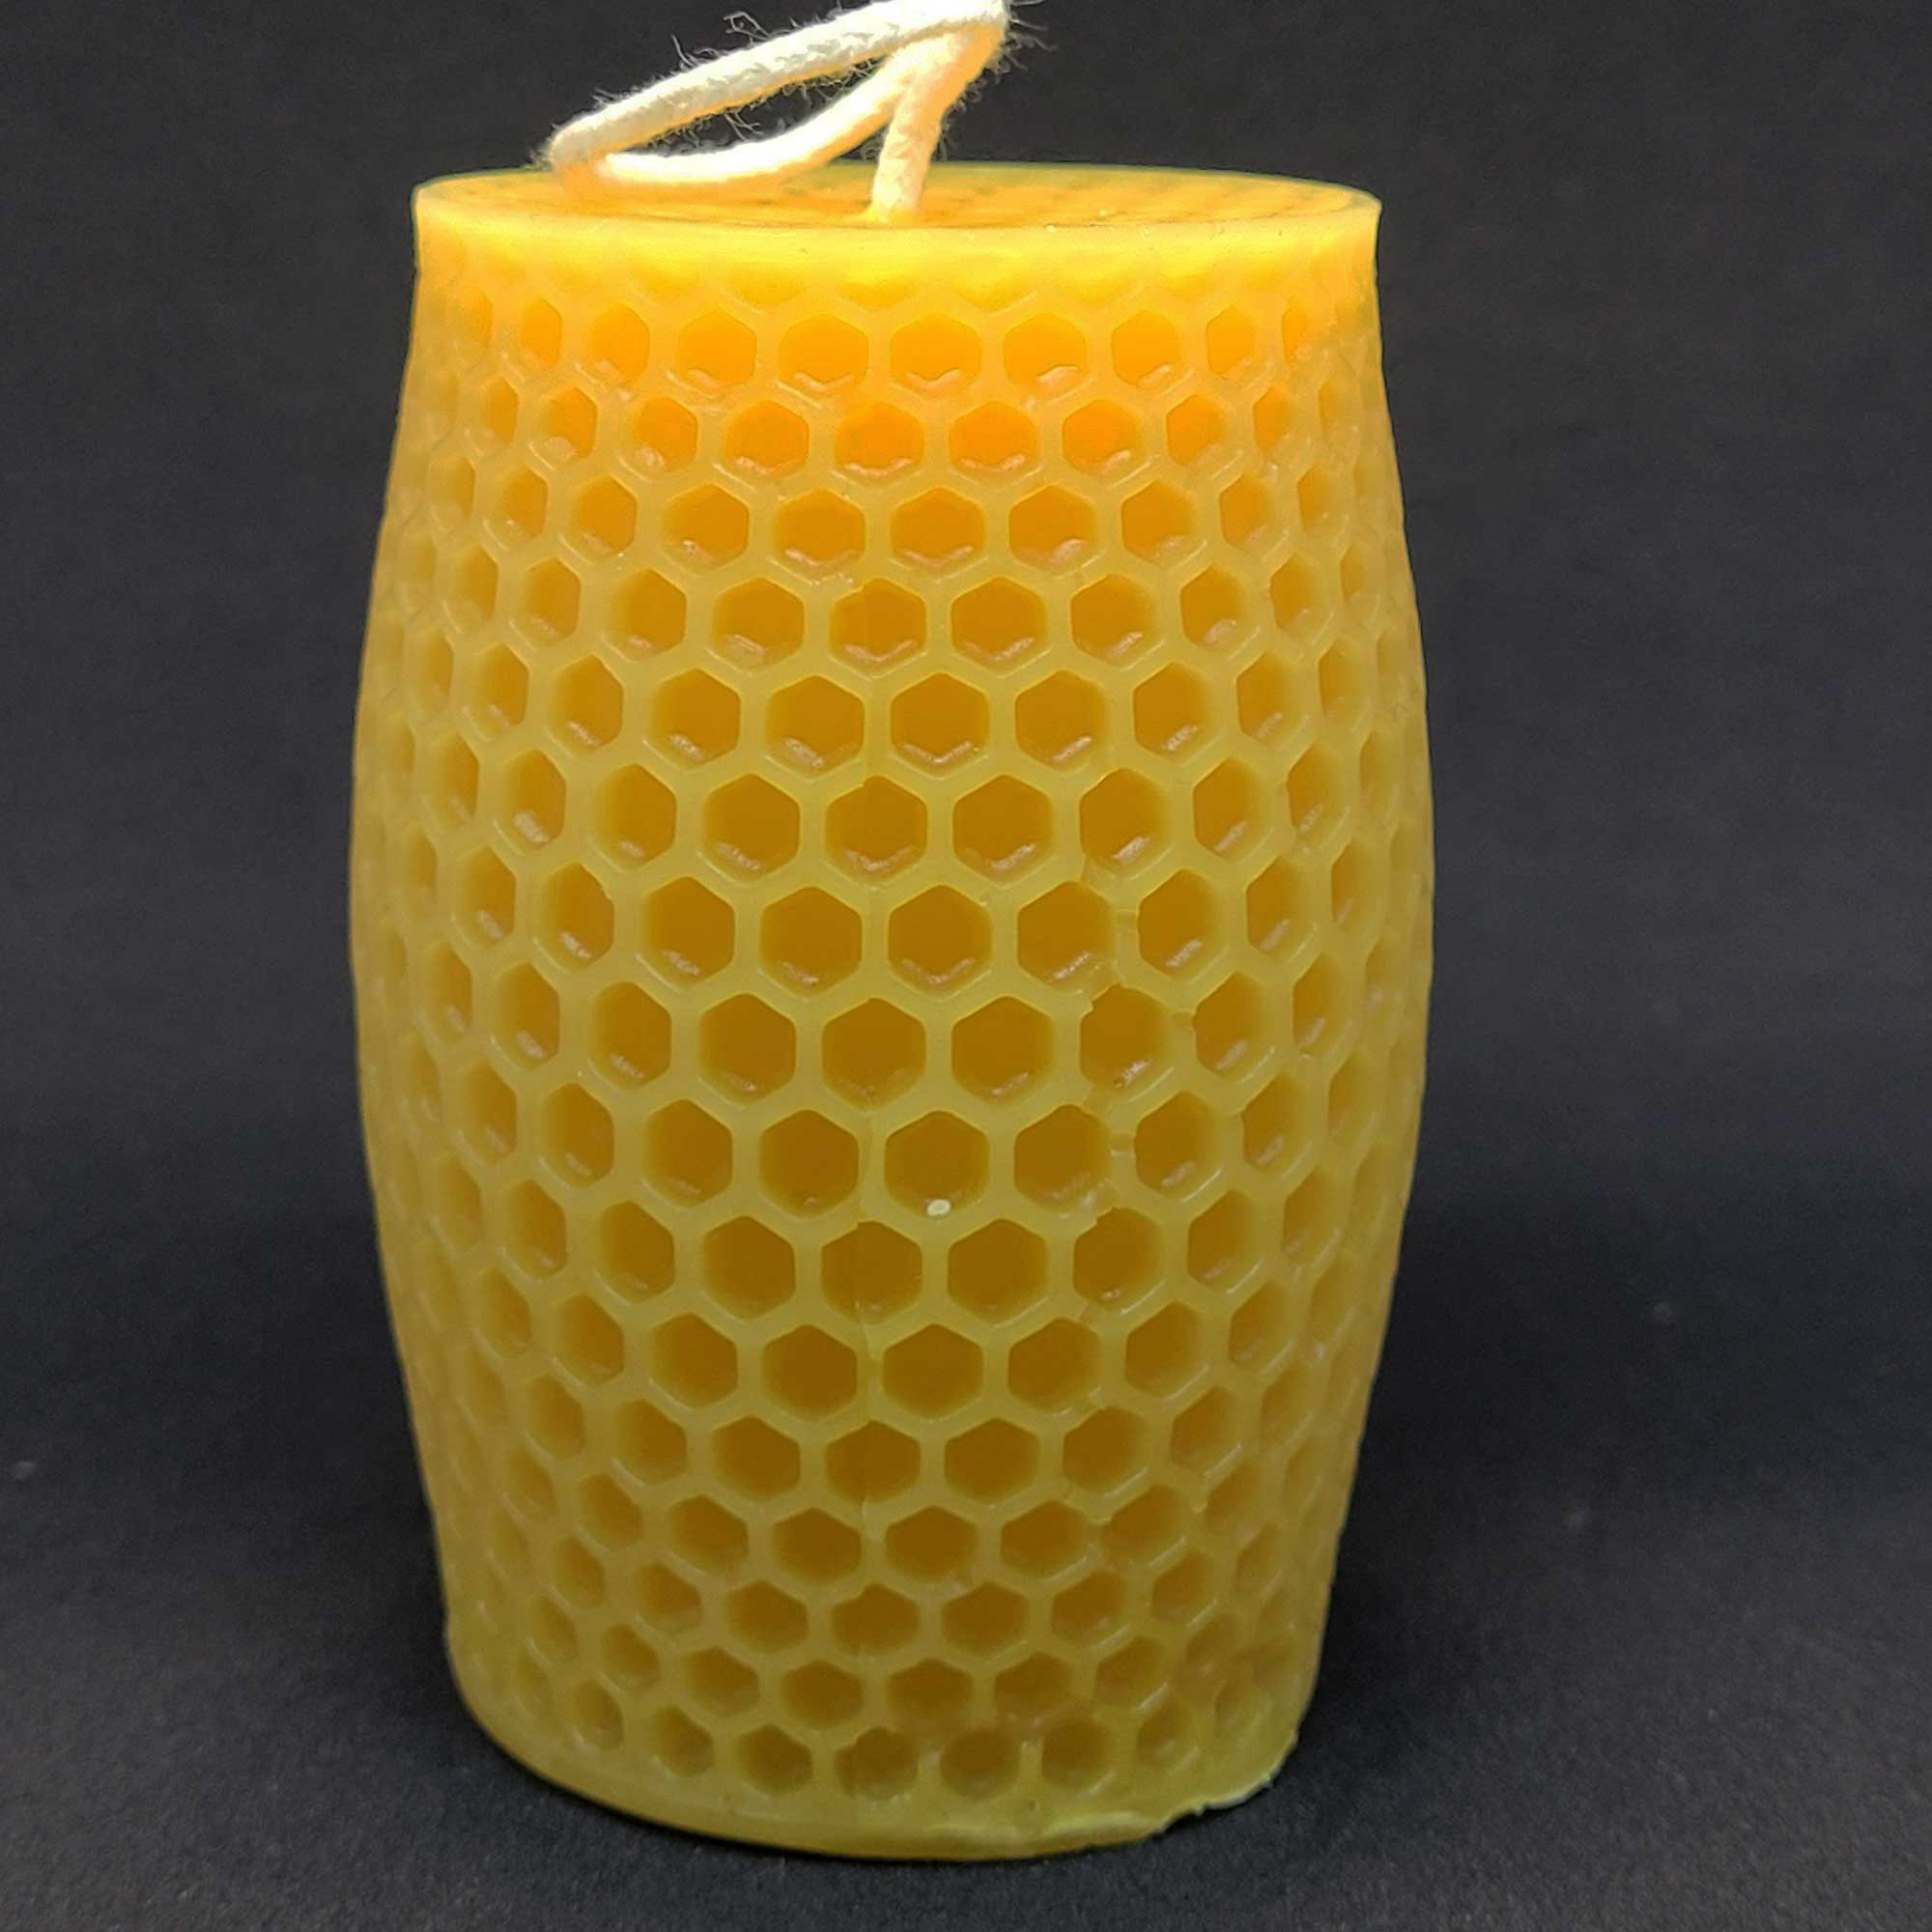 100 Percent Honeycomb Beeswax Candles – 1 Candle